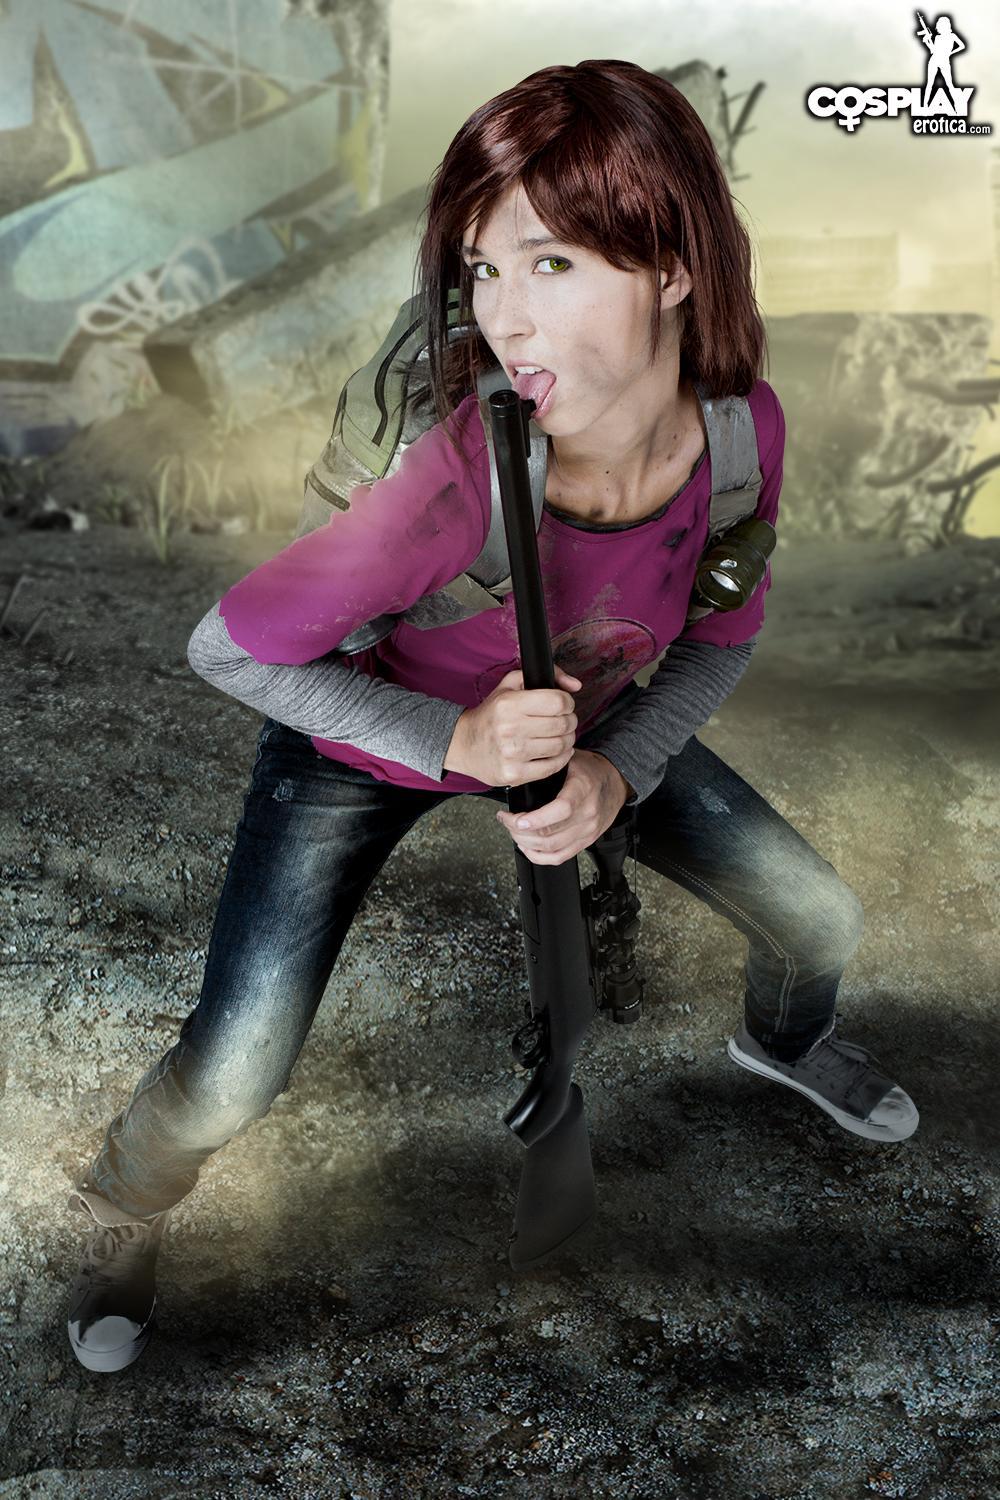 Cute cosplay girl Stacy is going to win the war in Resistance #60007657